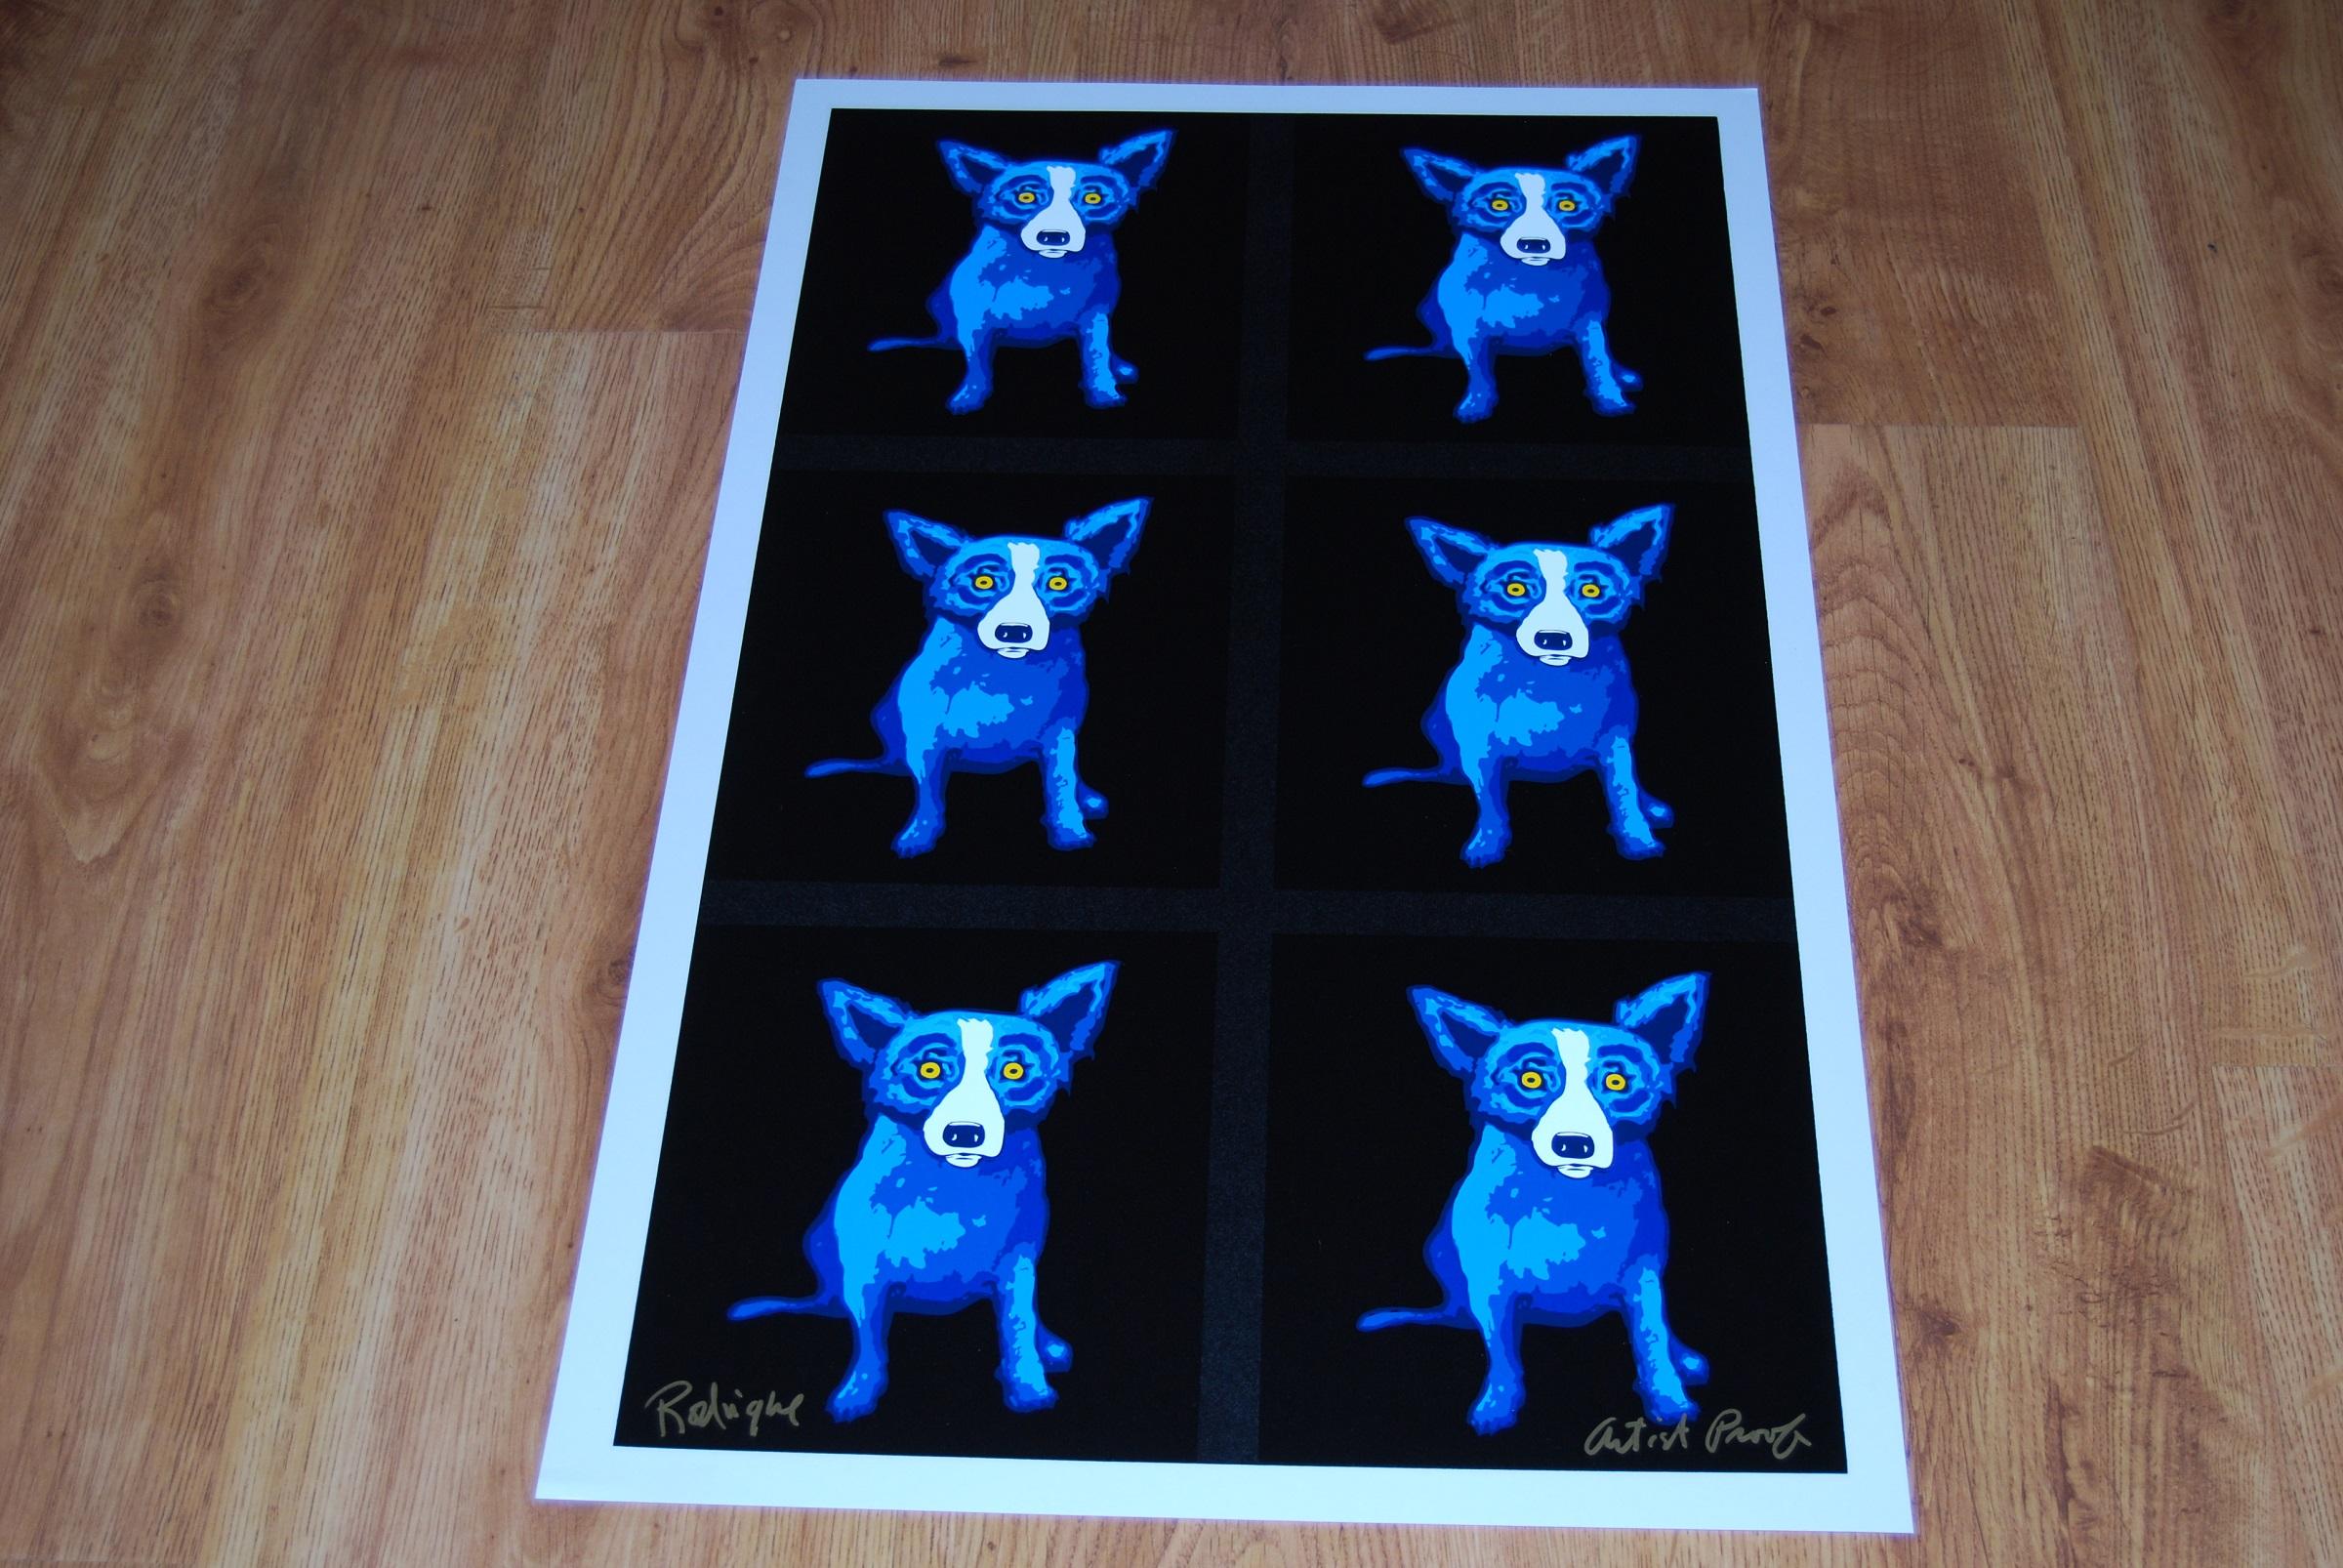 This Blue Dog work consists of 6 blue dogs on a solid black background.  All the dogs have soulful yellow eyes.  This pop art animal original silkscreen print is guaranteed authentic and is hand signed by the artist.

Artist:  George Rodrigue
Title: